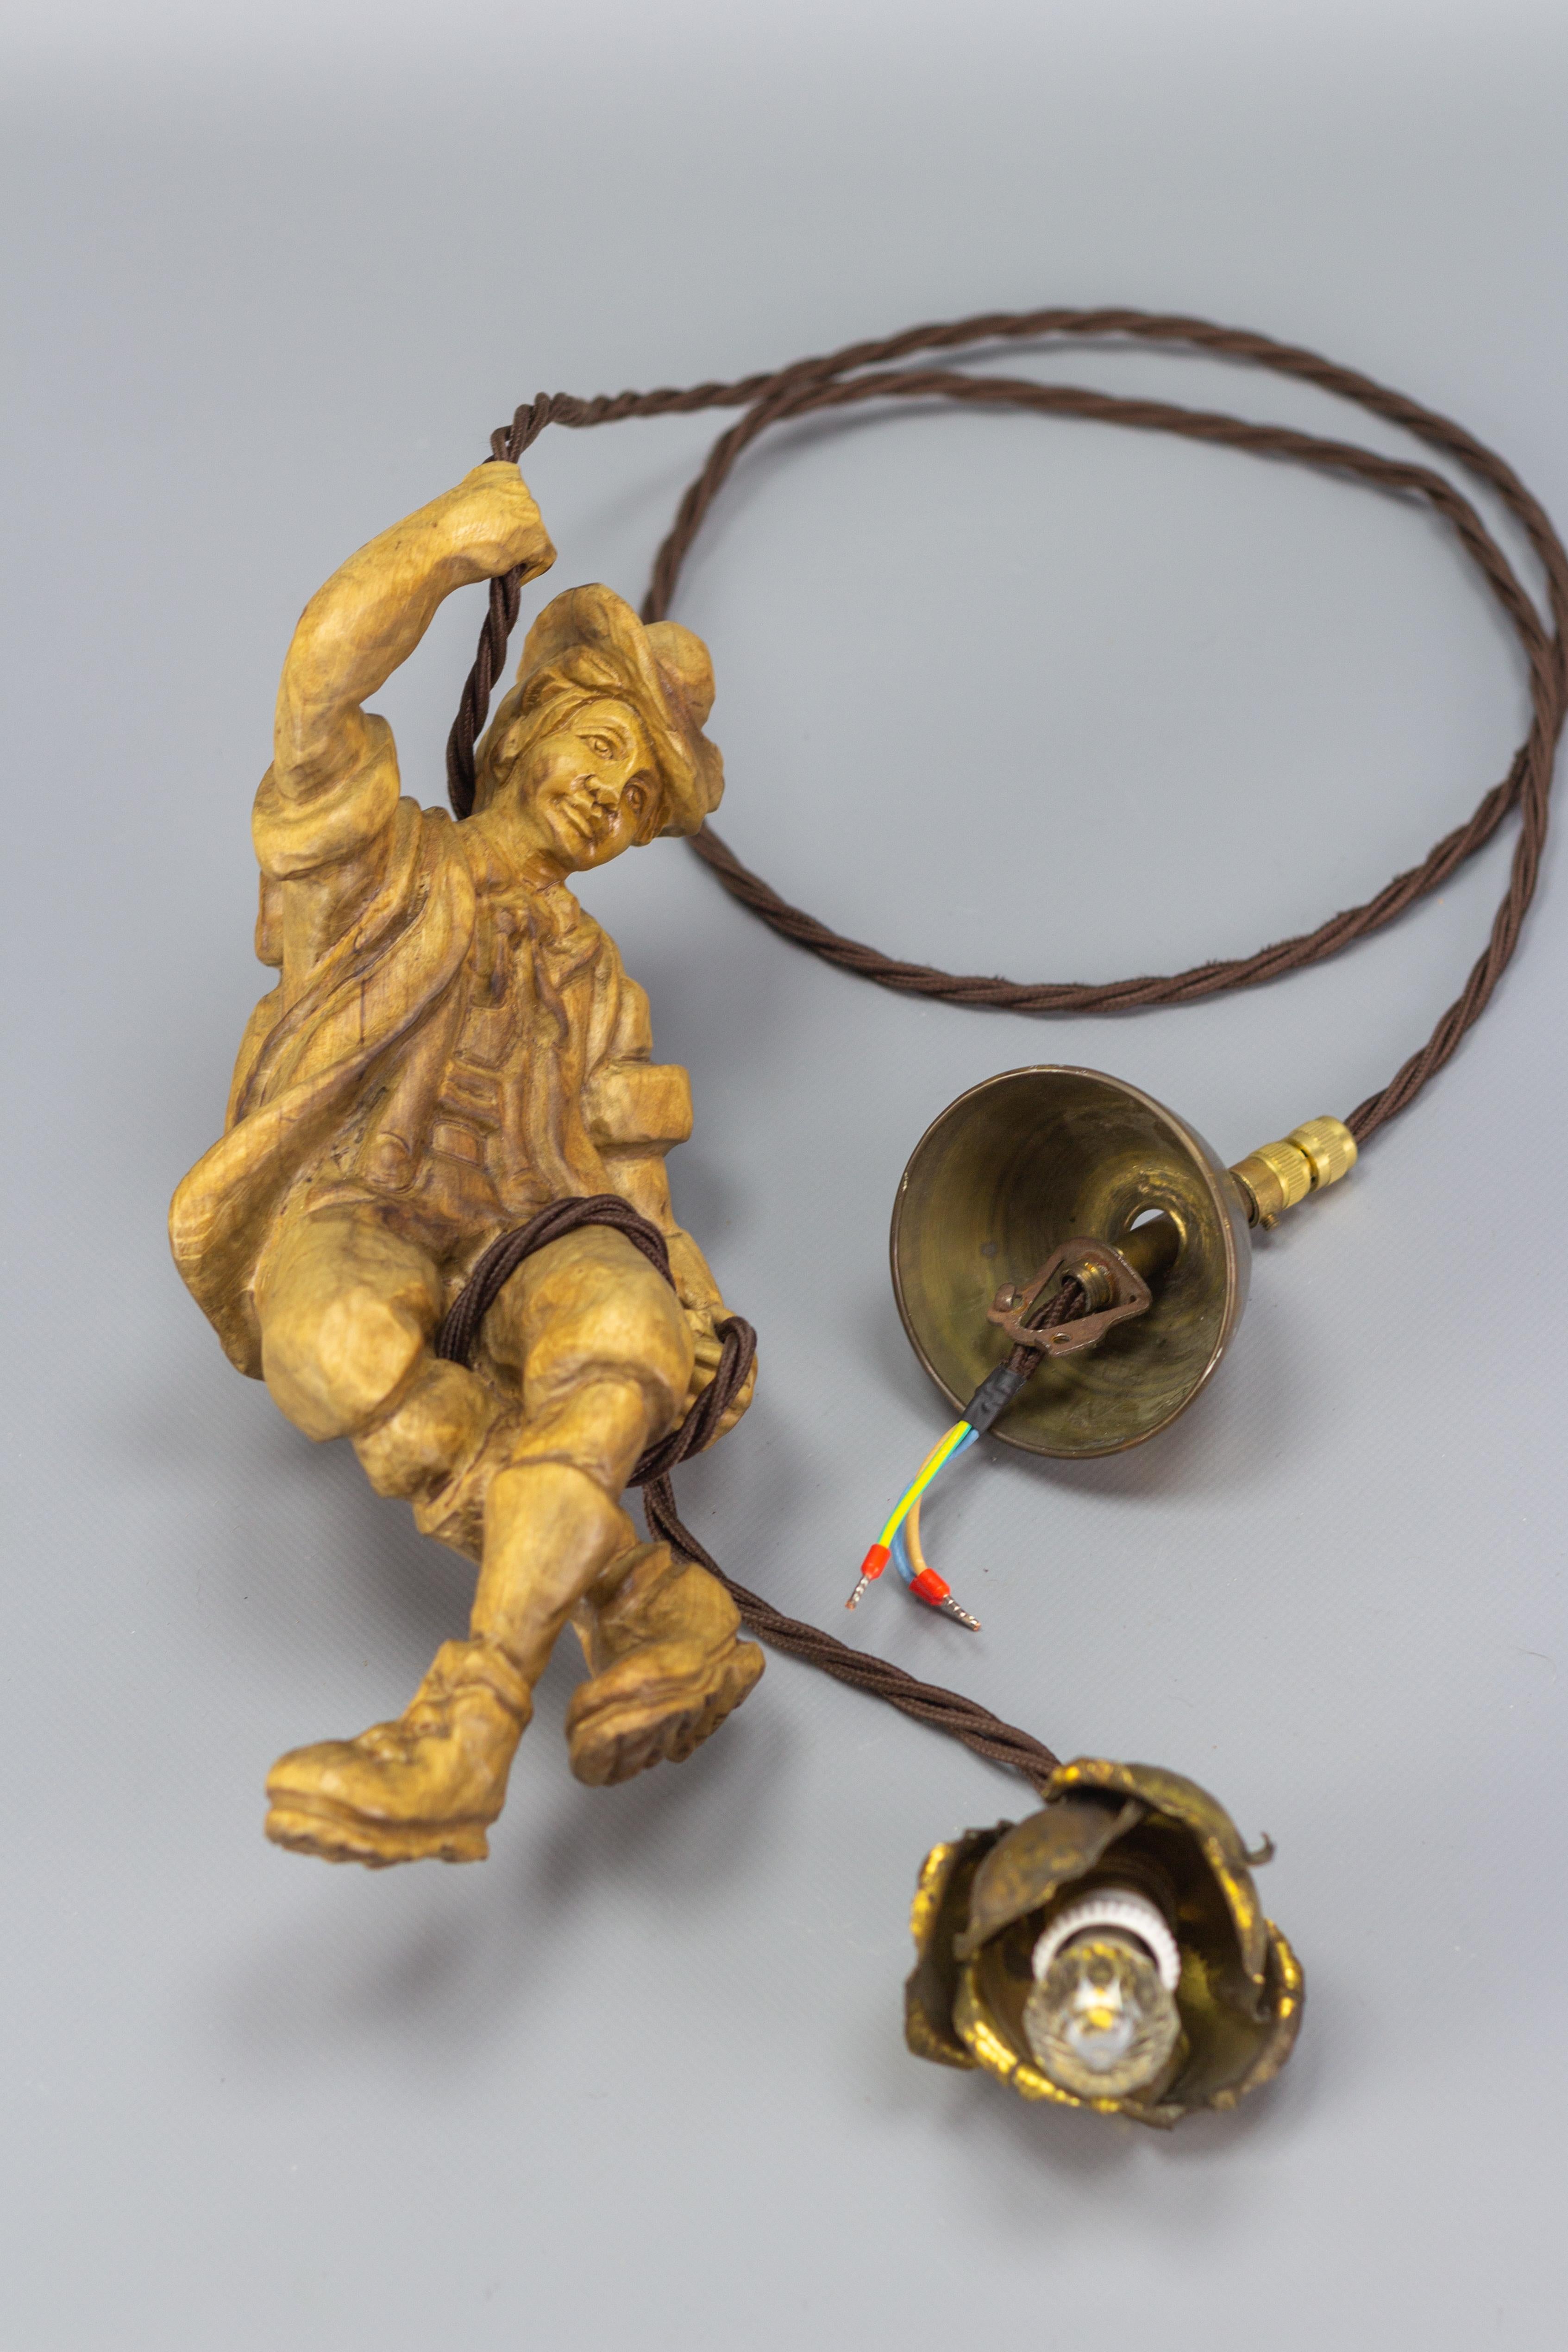 Hanging Brass Light Fixture with a Wooden Figure of a Mountain Climber For Sale 2